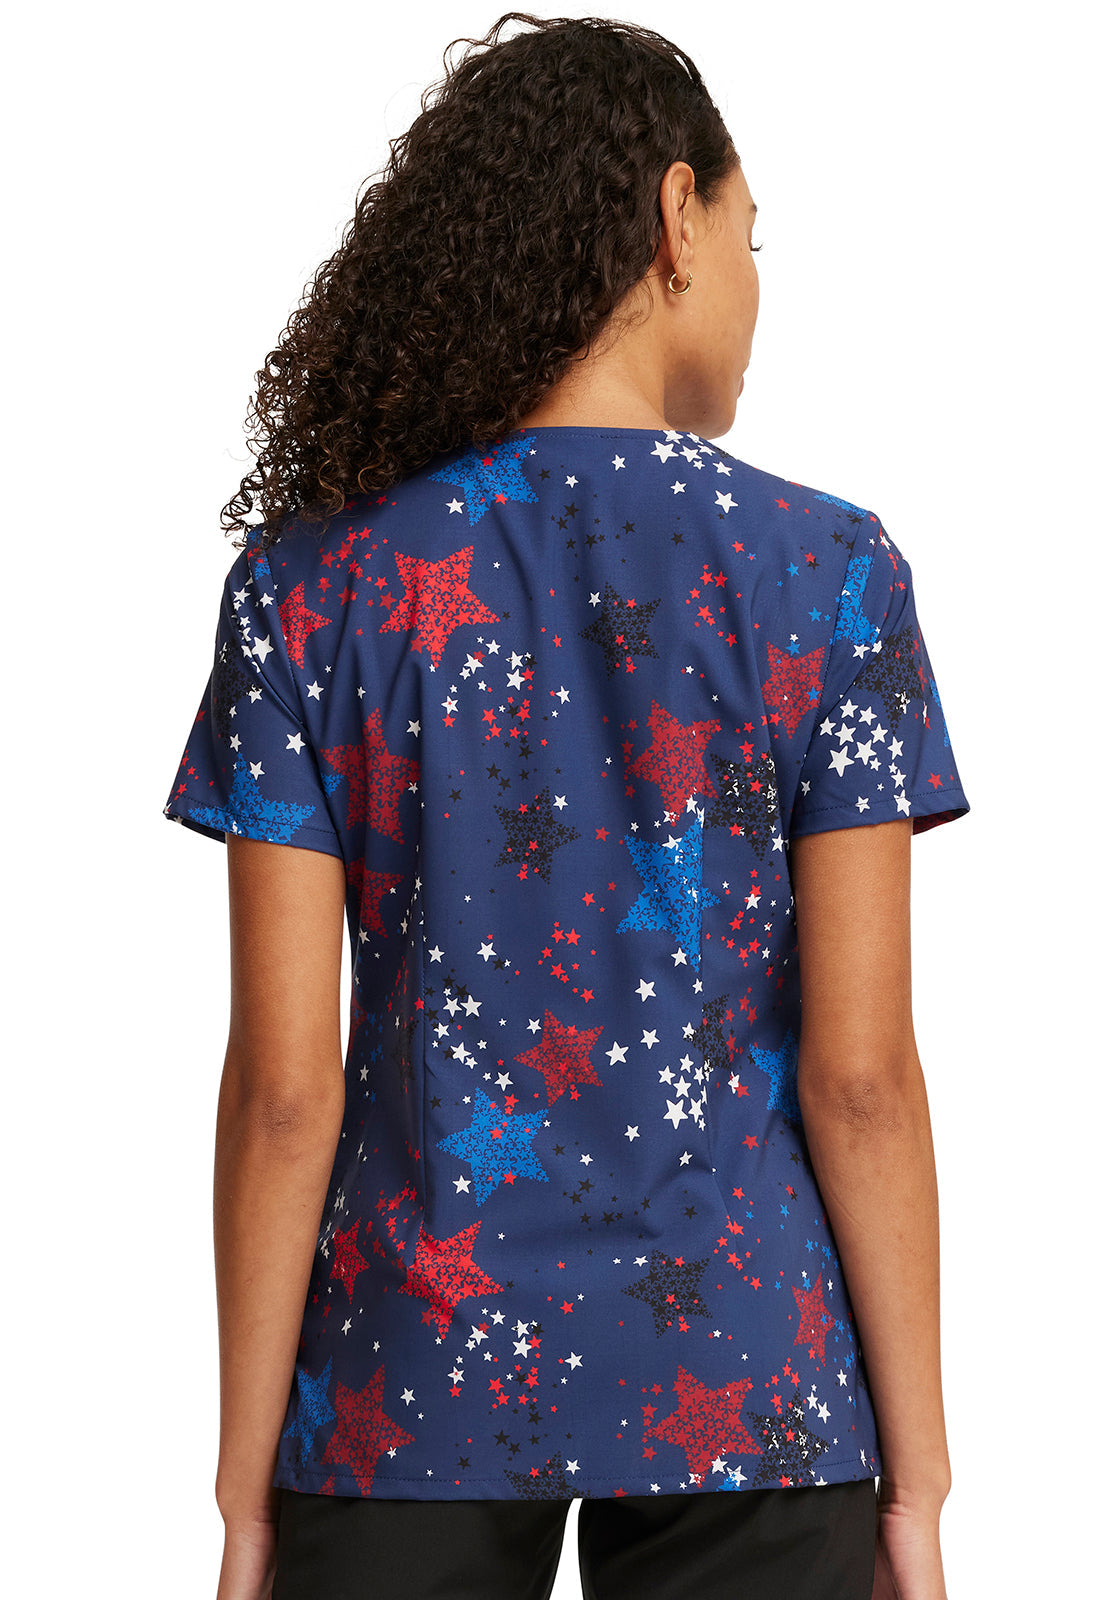 Hang With The Stars Scrub Top Women's Print Top Cherokee Licensed   